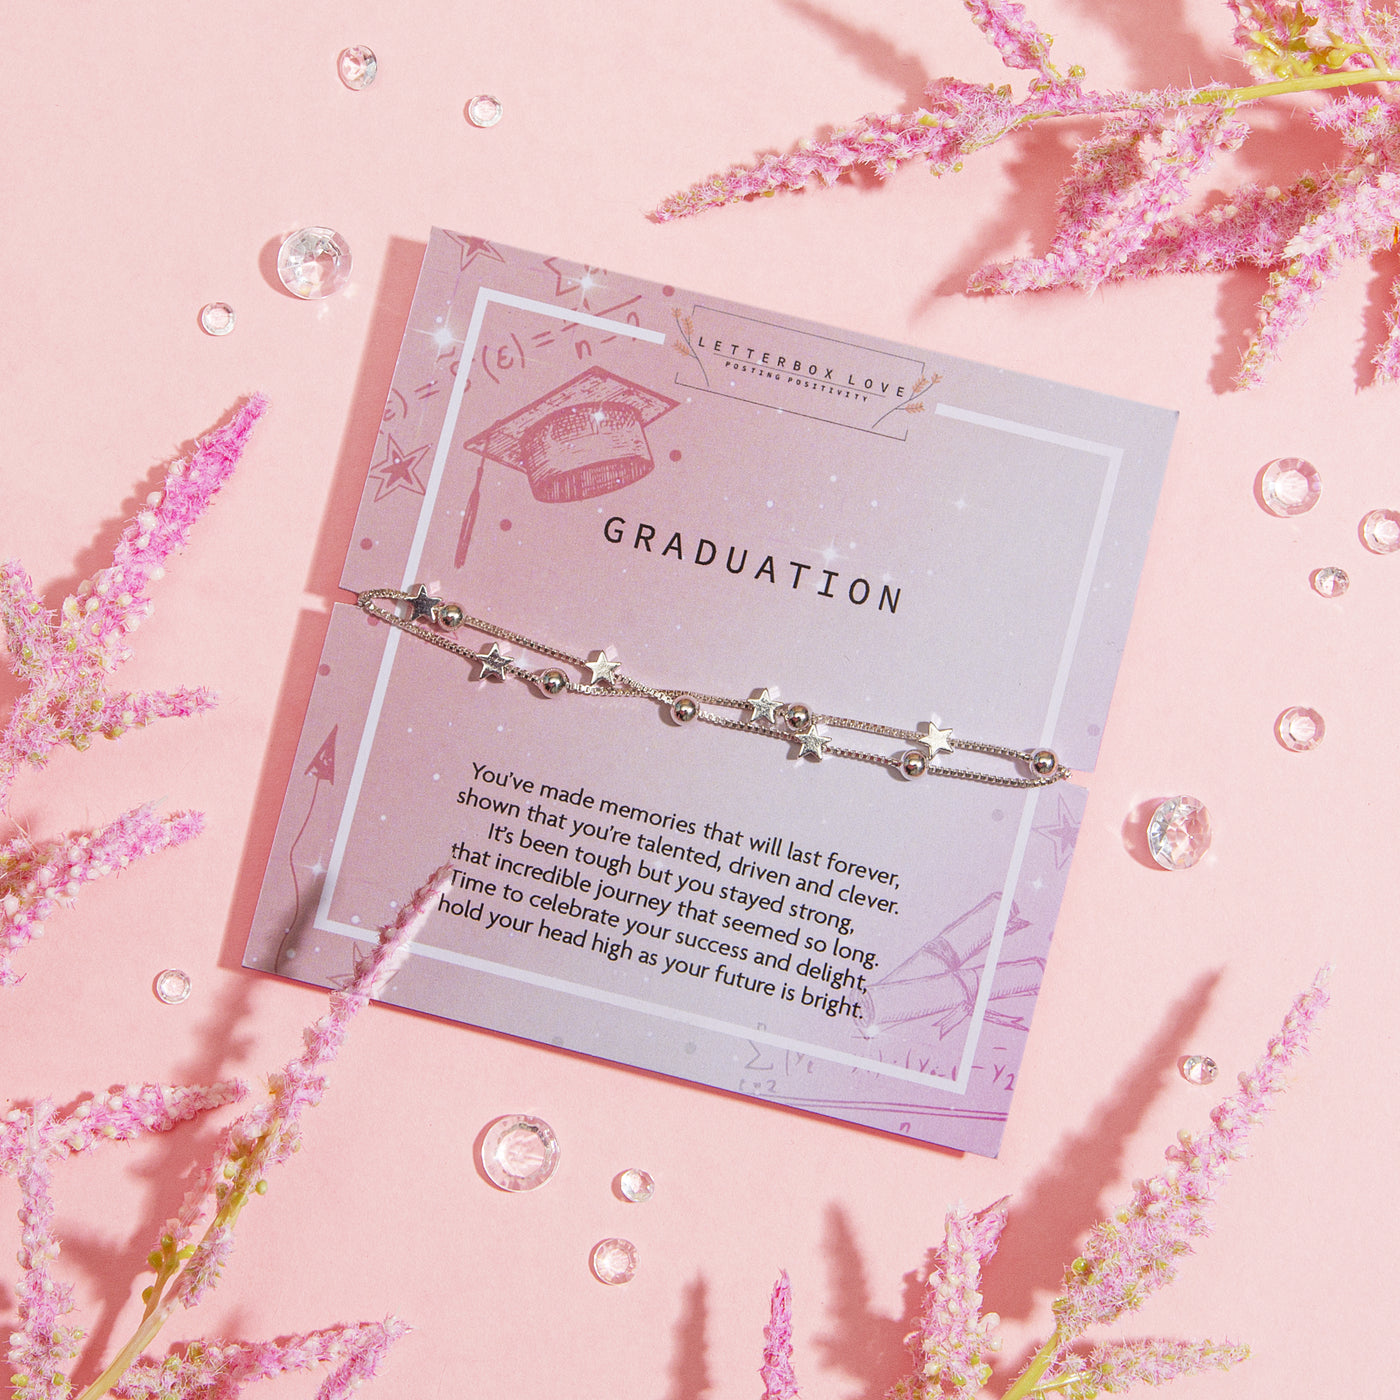 GRADUATION' bracelet with star charms and a solitary pearl, displayed on a soft pink card adorned with illustrations of a graduation cap, arrows, and math symbols. The card carries an uplifting message celebrating a graduate's achievements and bright future.